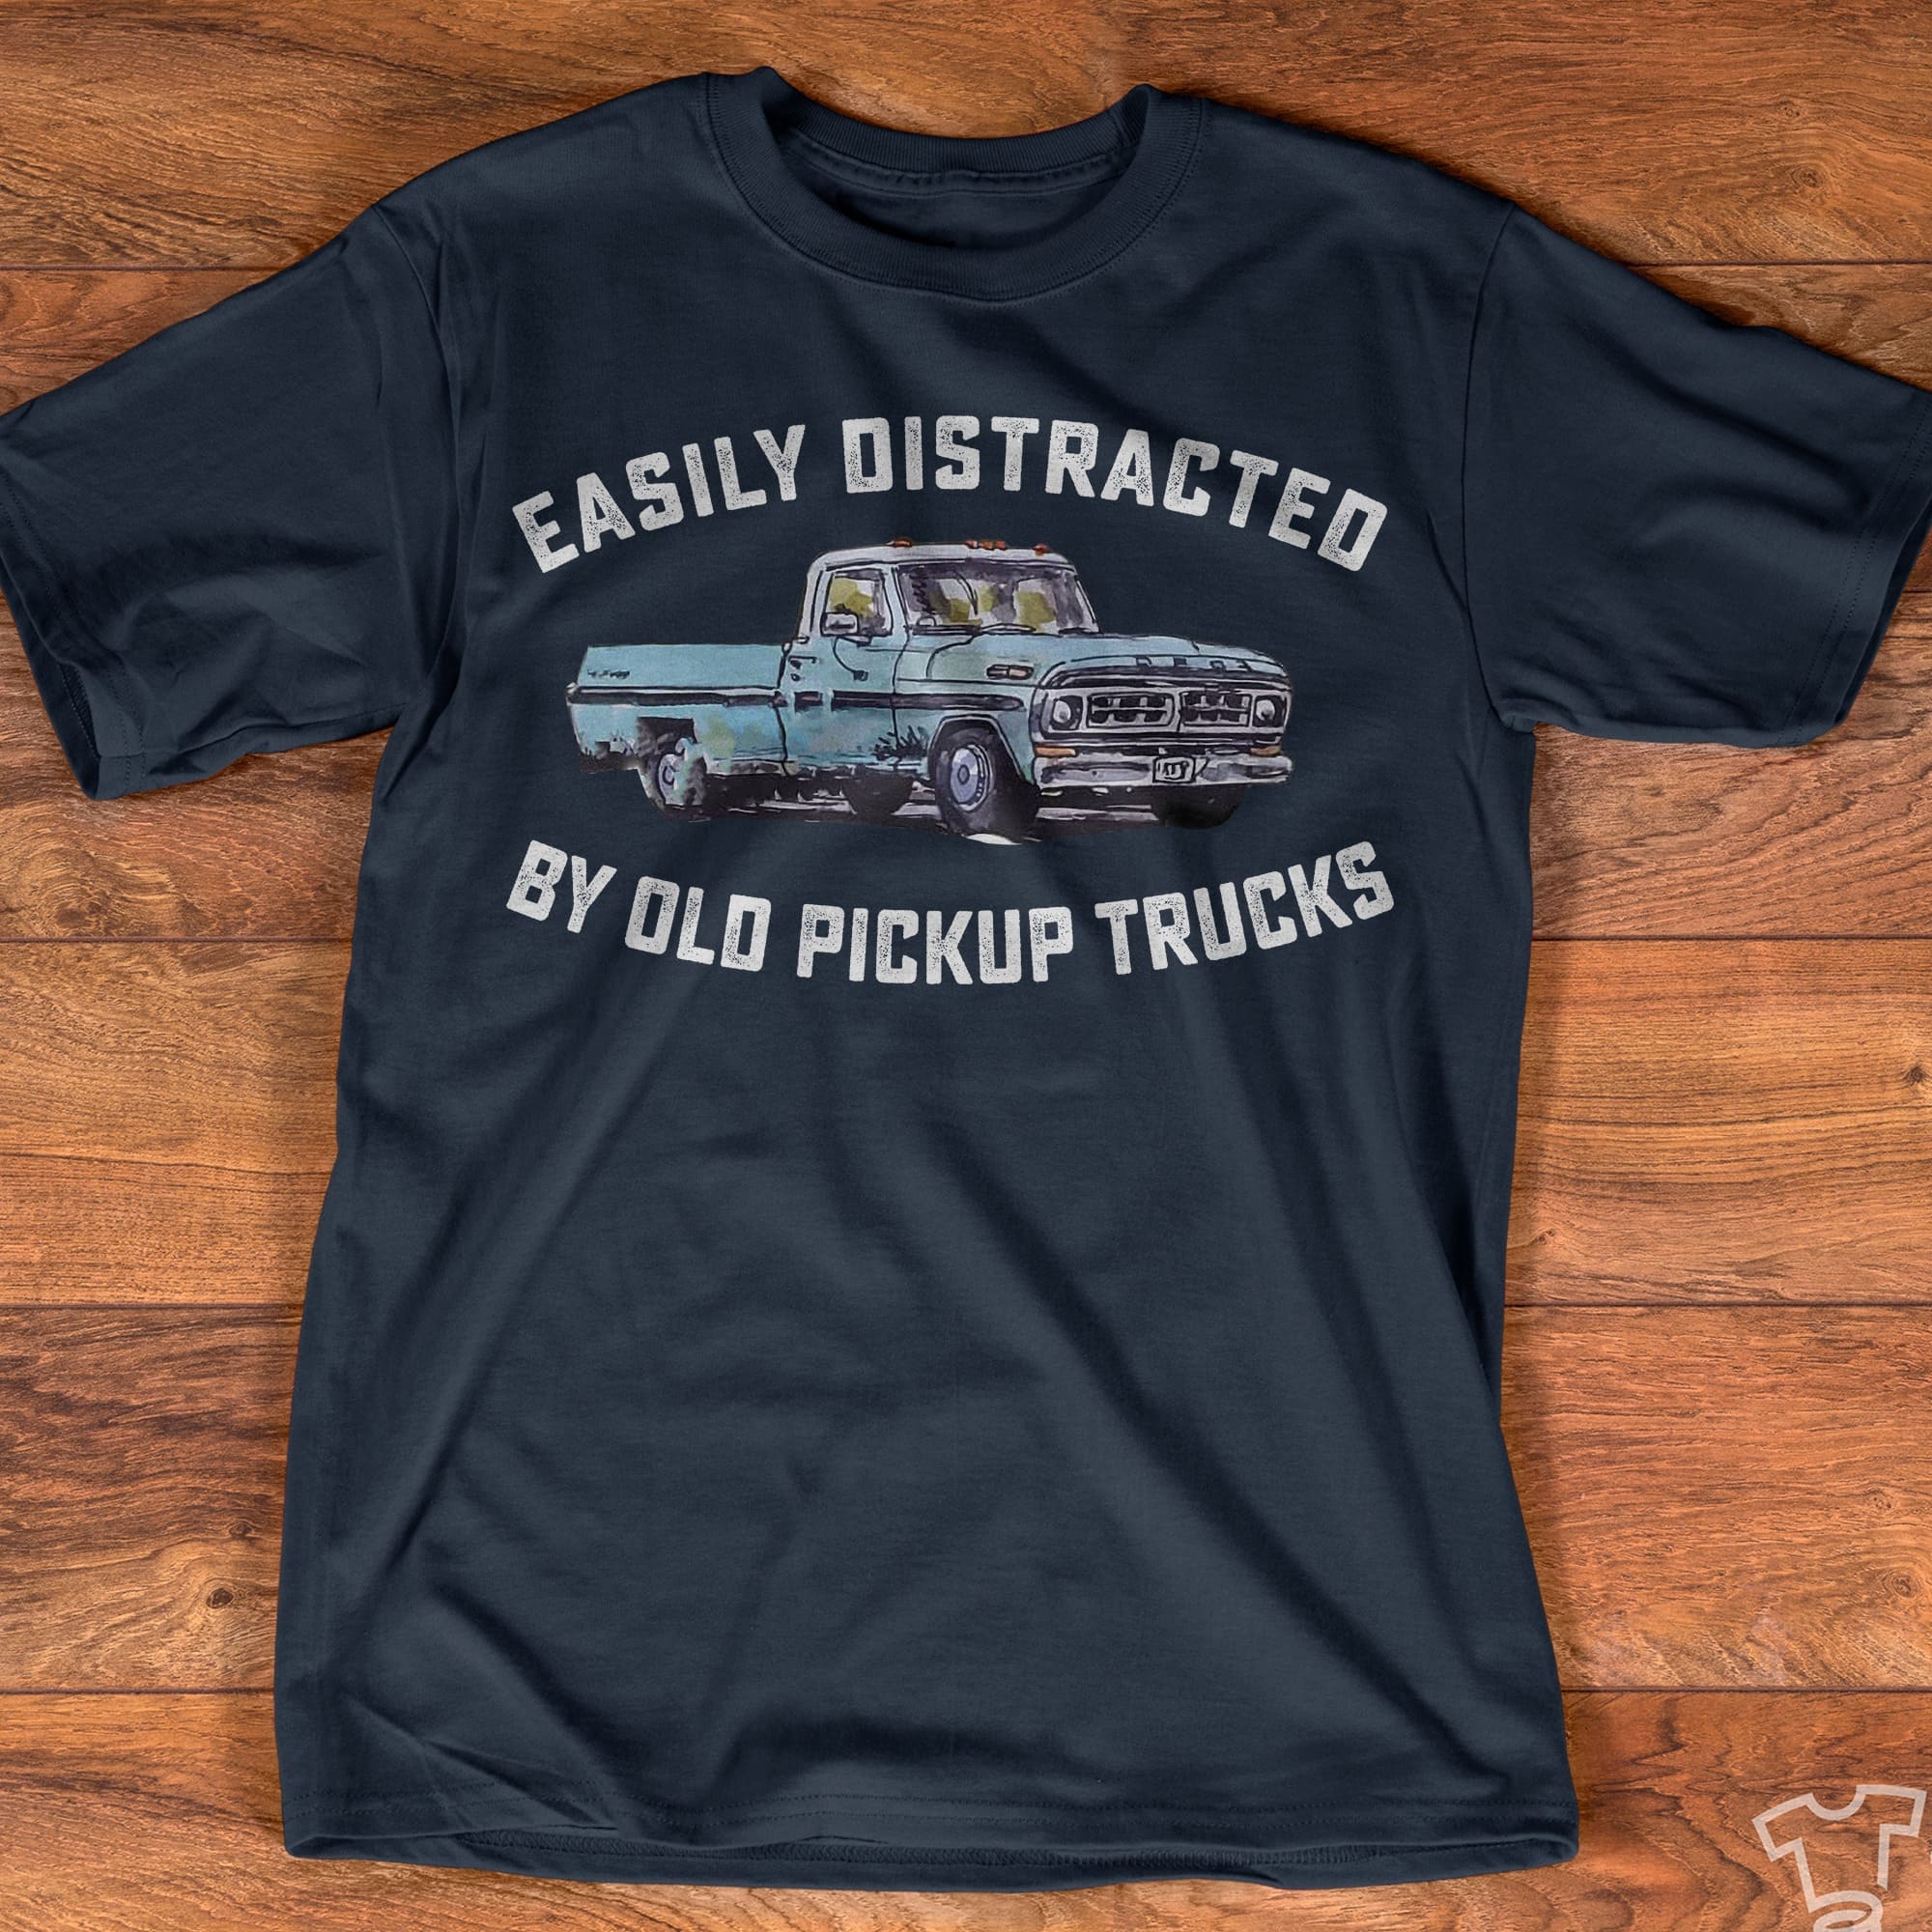 Easily distracted by old pickup trucks - Gift for truck collector